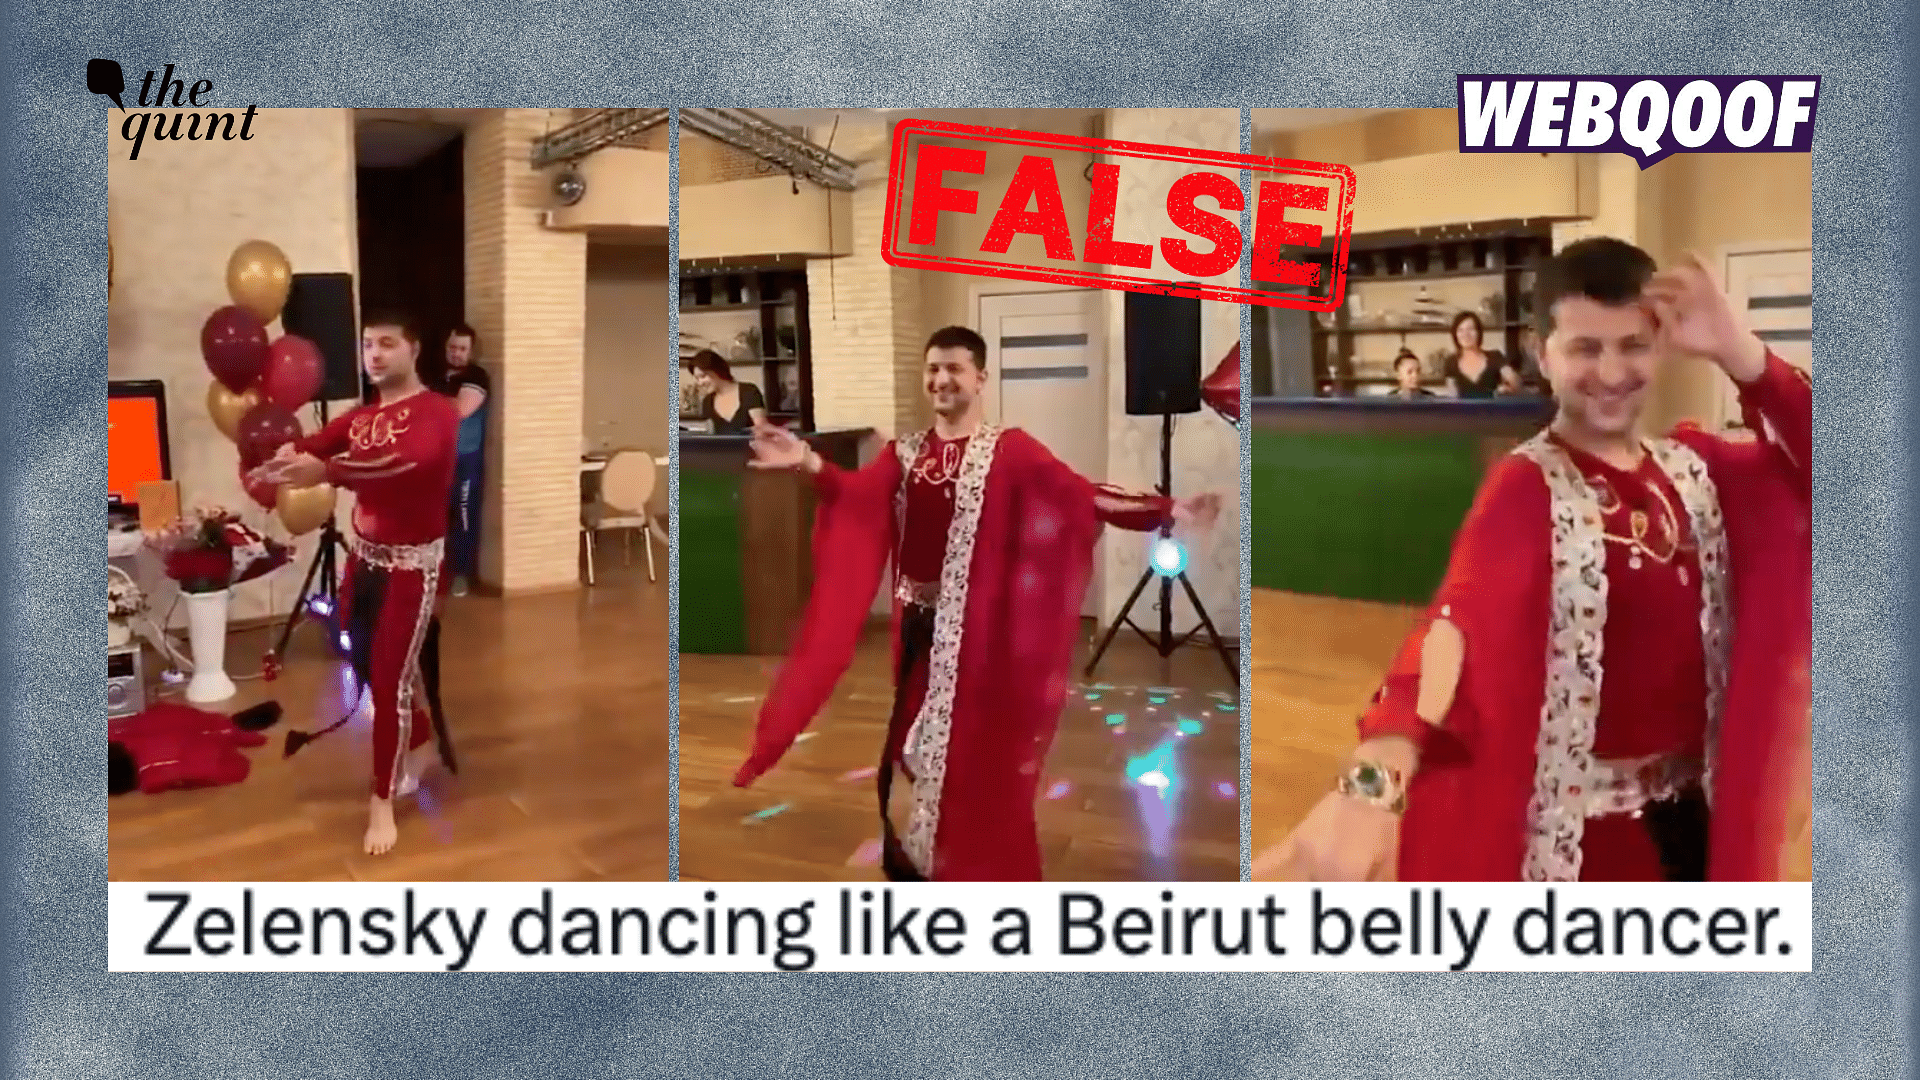 <div class="paragraphs"><p>The video is a deepfake and does not show Zelenskyy dancing.</p></div>